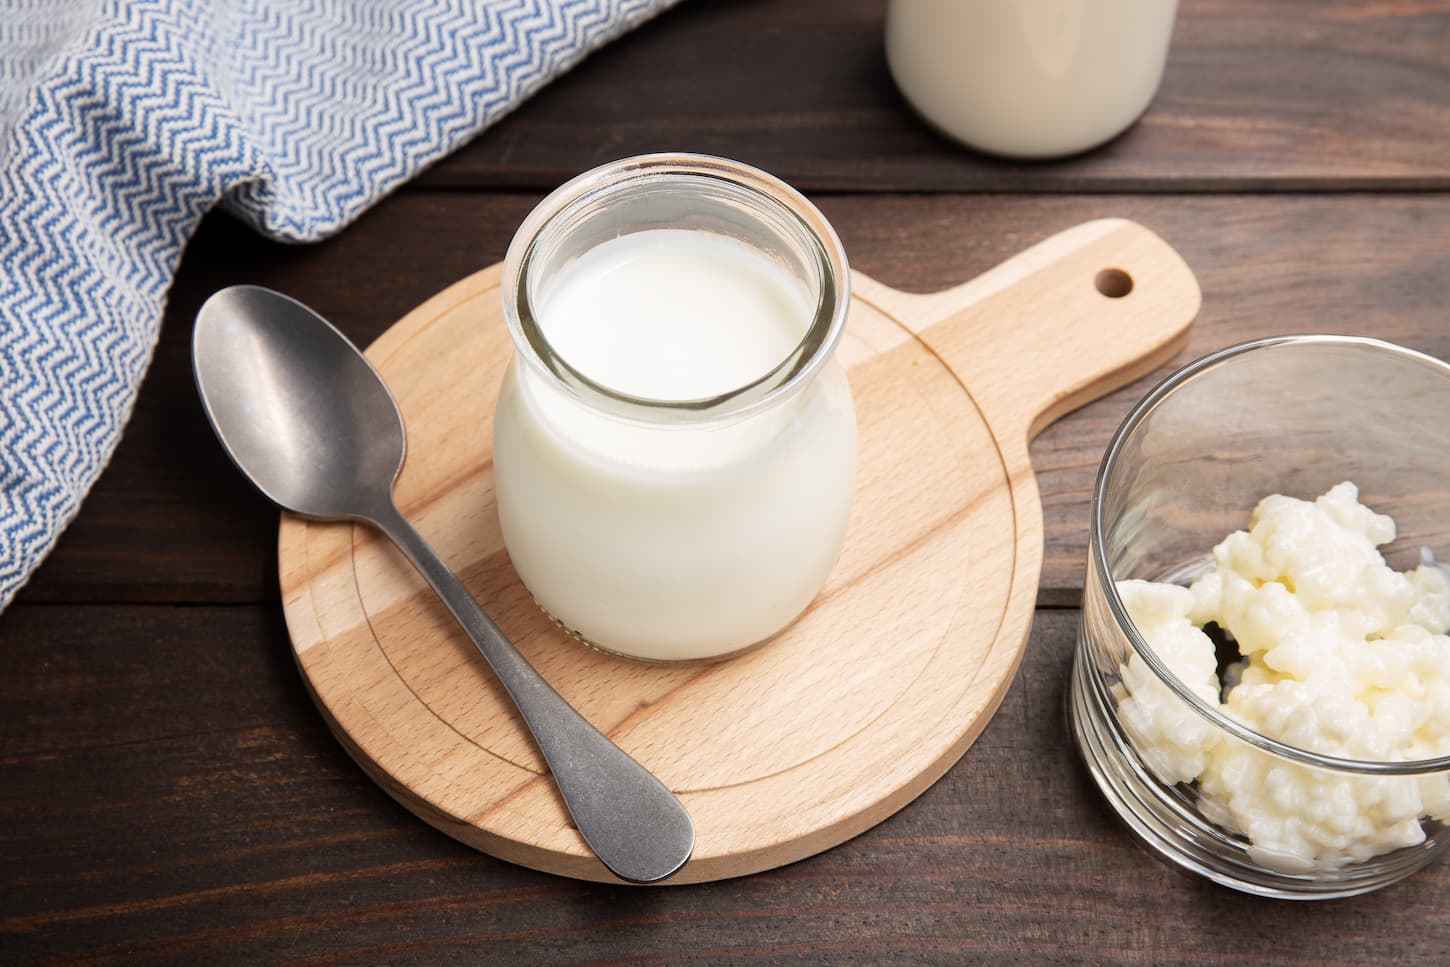 An image of healthy yogurt and kefir grains in glass on a wooden table.